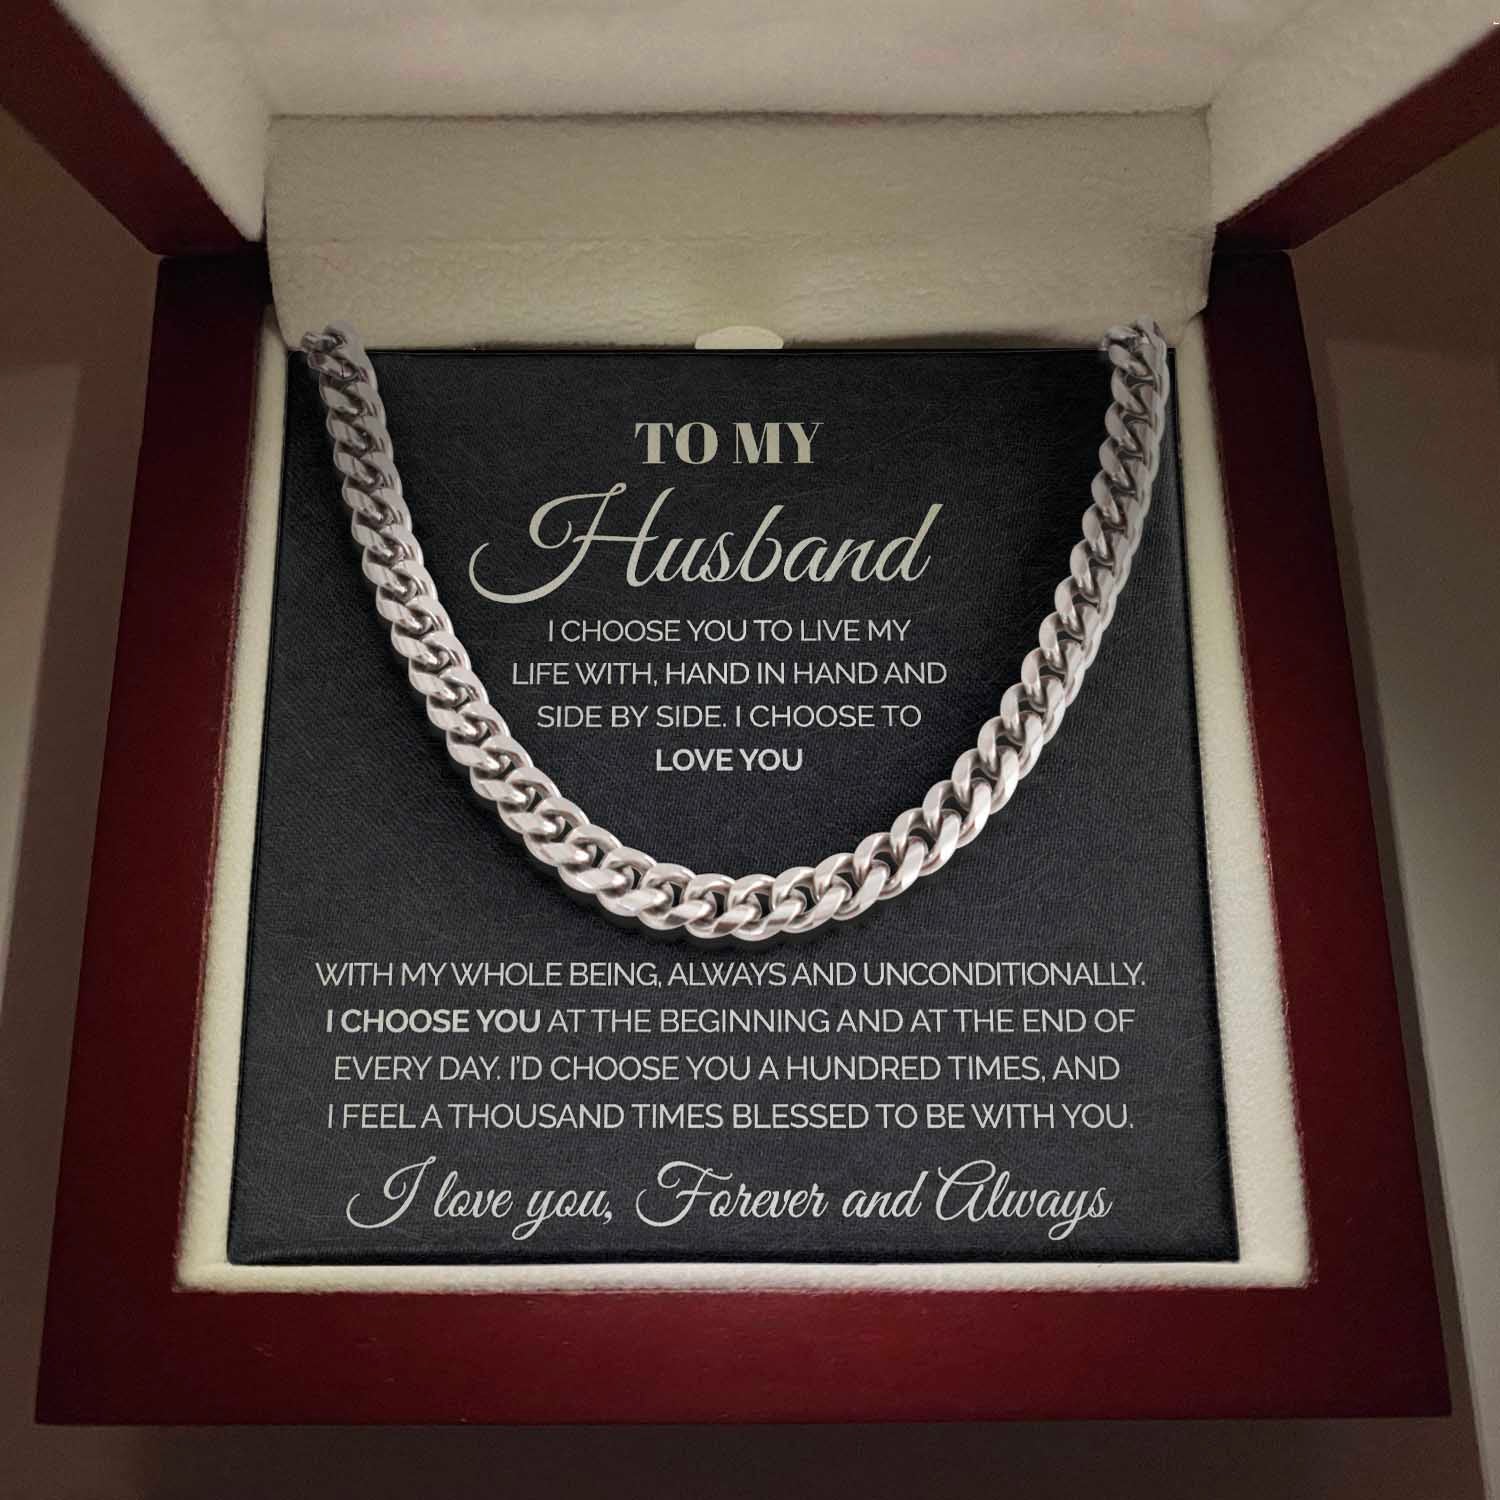 ShineOn Fulfillment Jewelry 316L Stainless Steel To my Husband - I choose you to live my life with - Cuban Link Chain Necklace